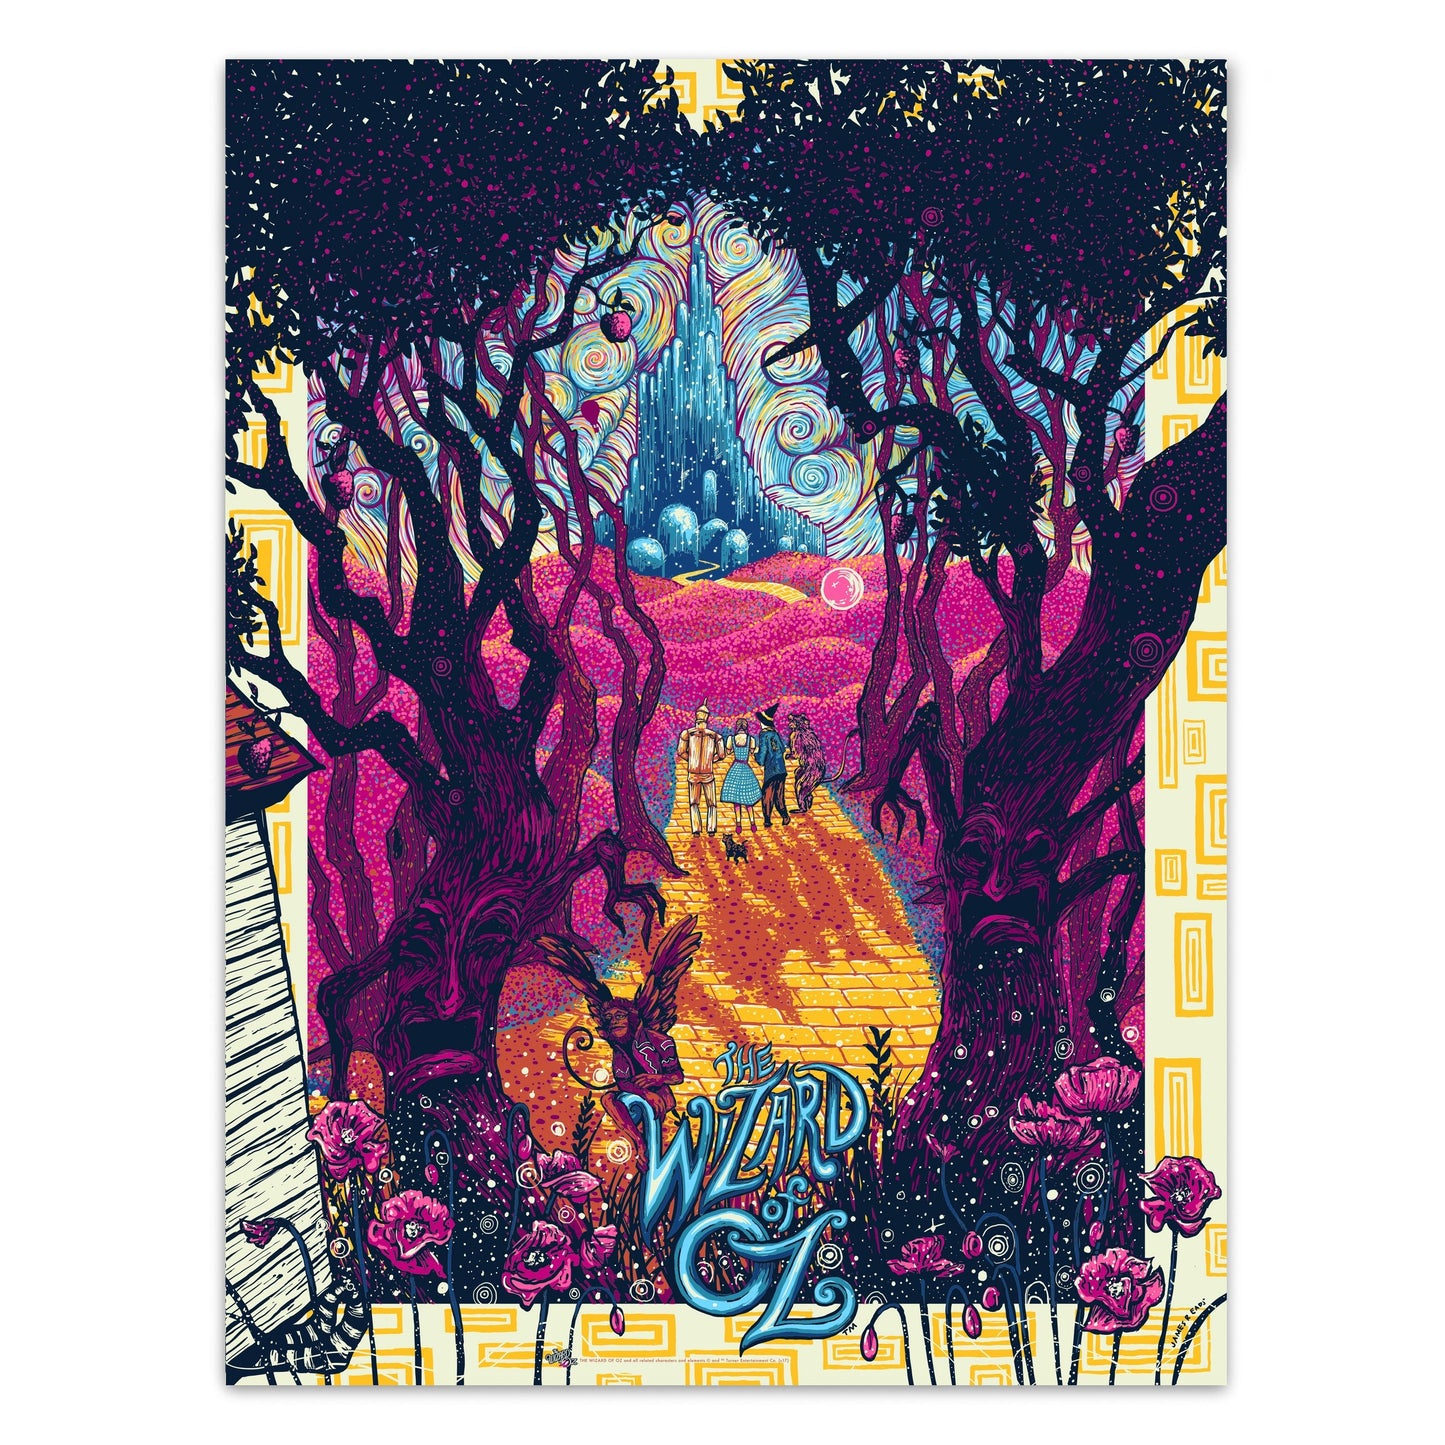 Poppies (Foil Variant AP Edition of 10) Print James R. Eads